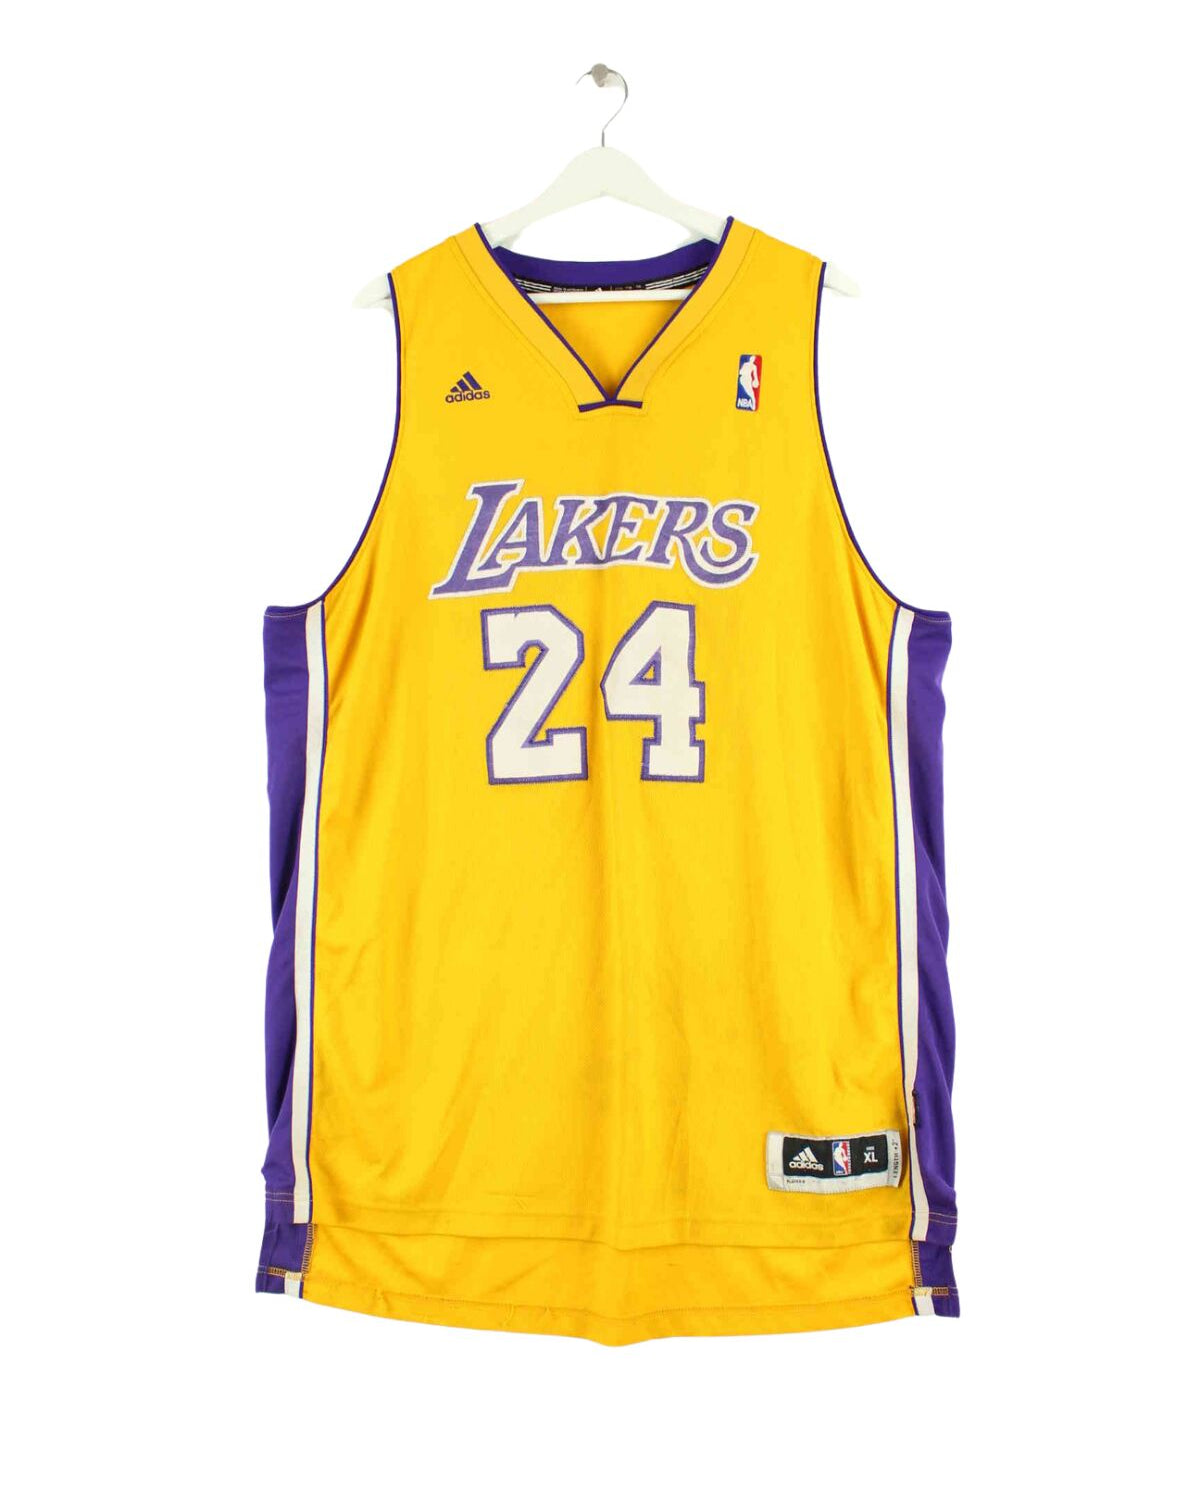 Adidas L.A. Lakers Bryant #24 Embroidered Jersey Gelb XL (front image)